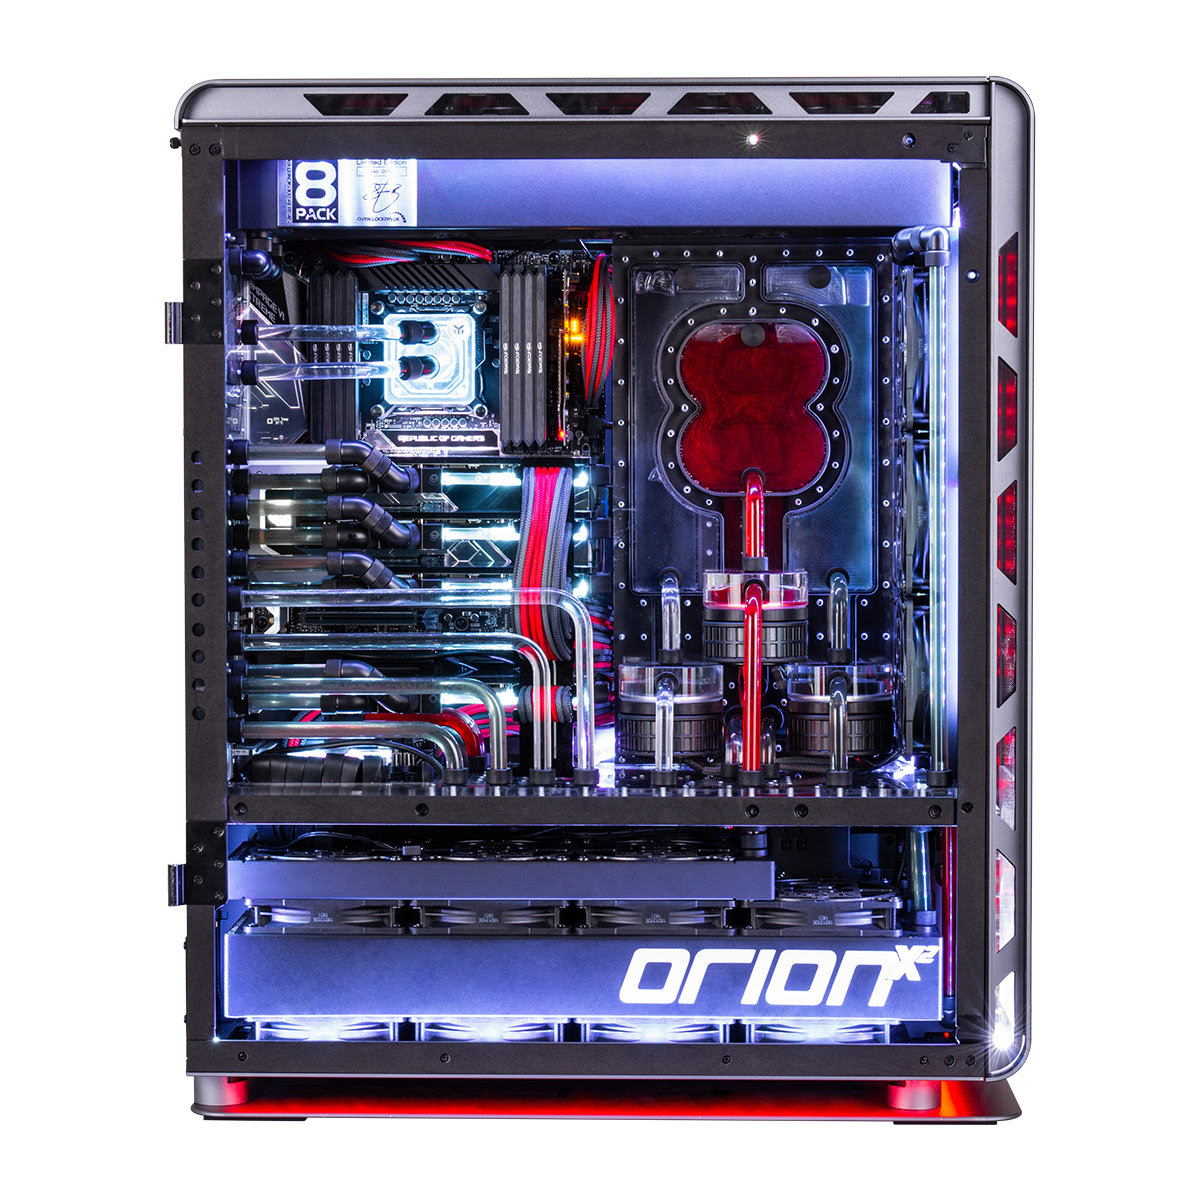 Overclockers UK Announces The World’s Most Powerful Dual System Computer